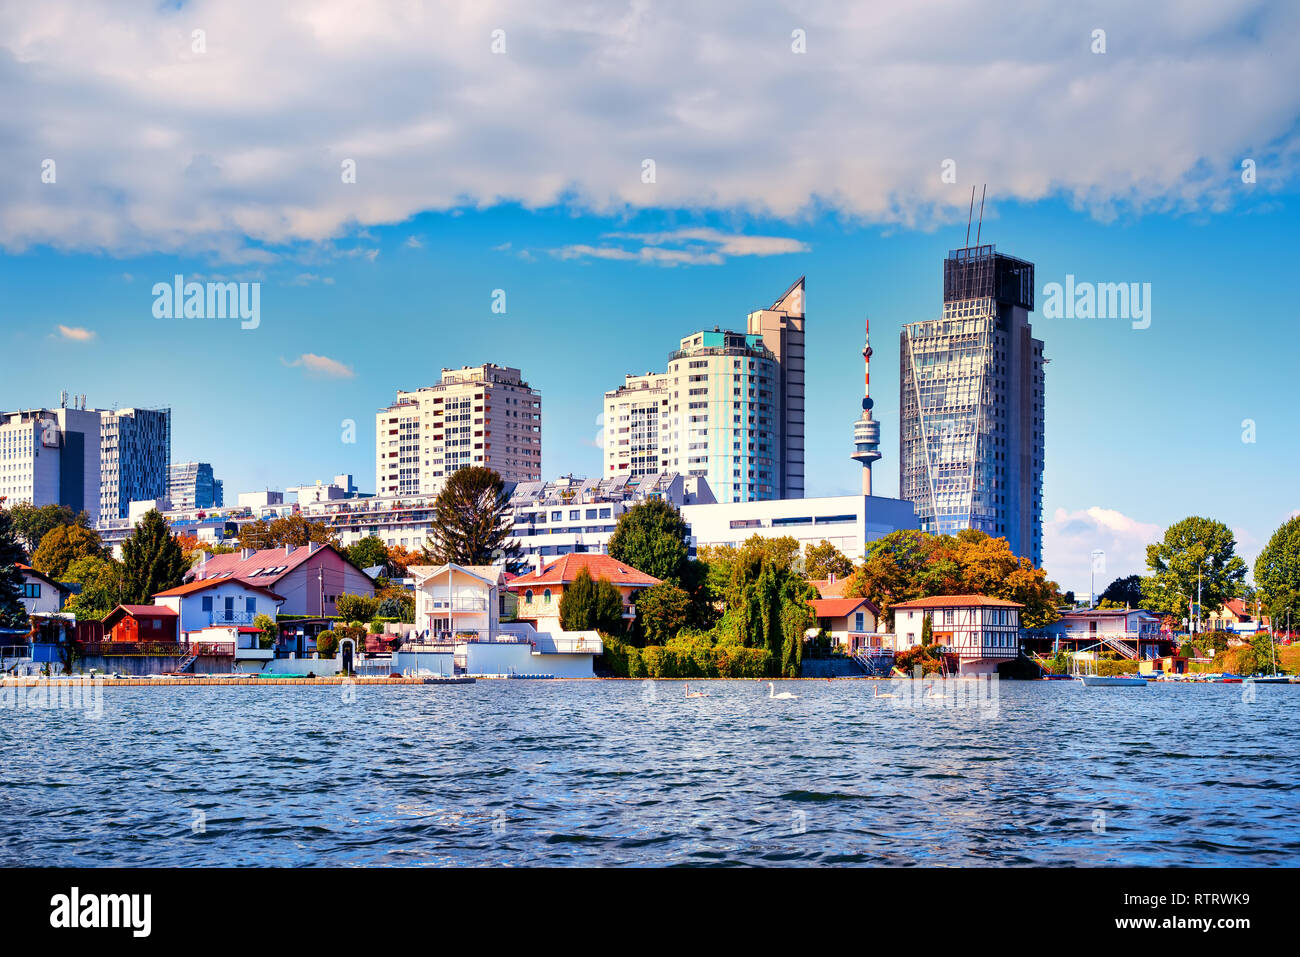 Sunny day at a lake in the city of Vienna, Austria Stock Photo